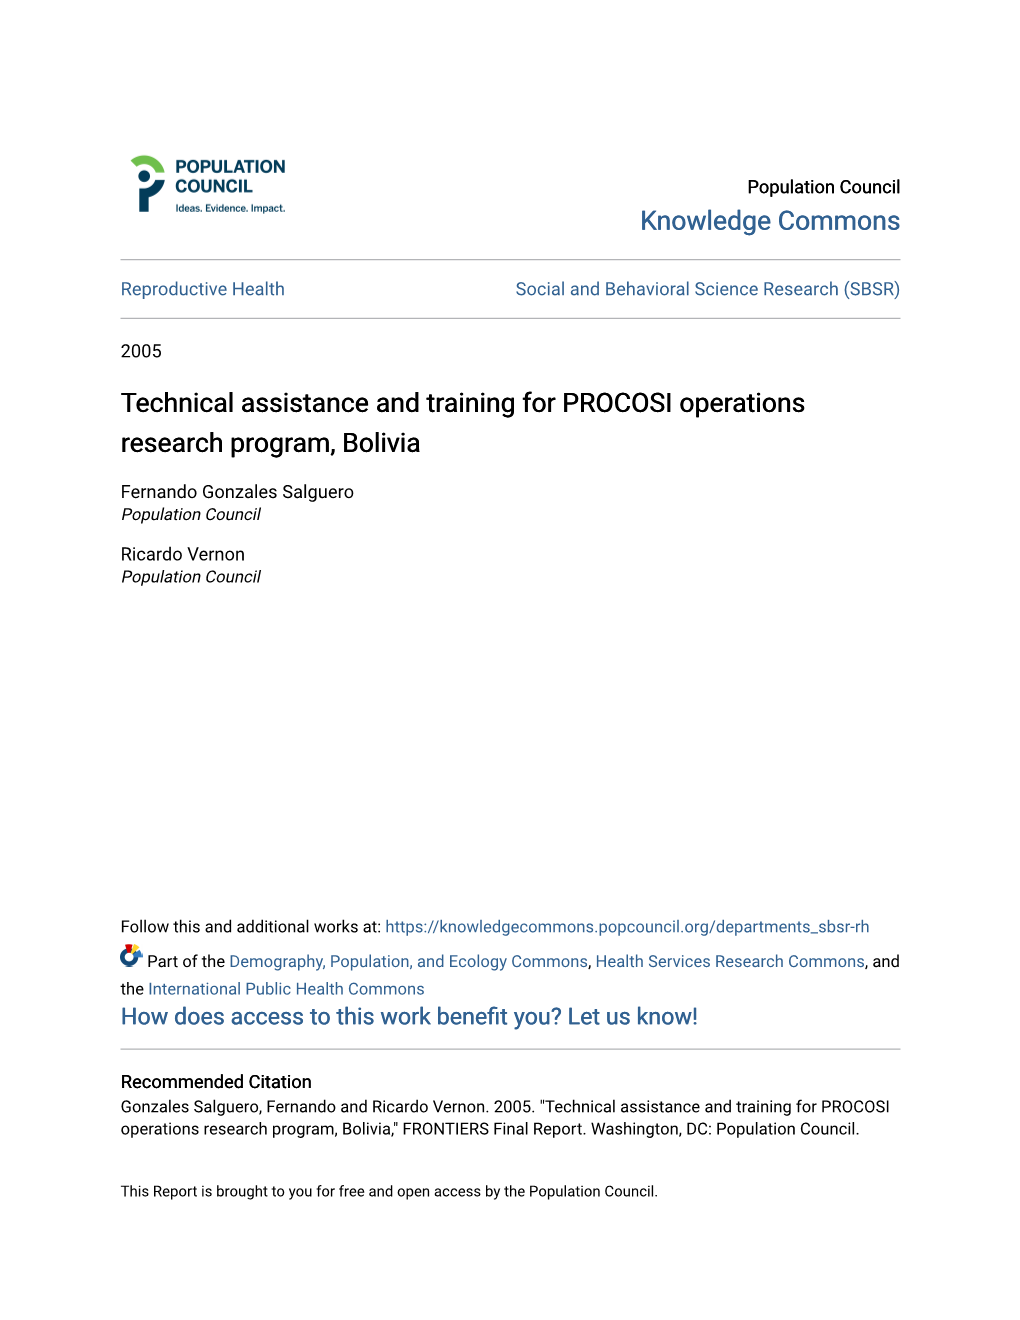 Technical Assistance and Training for PROCOSI Operations Research Program, Bolivia